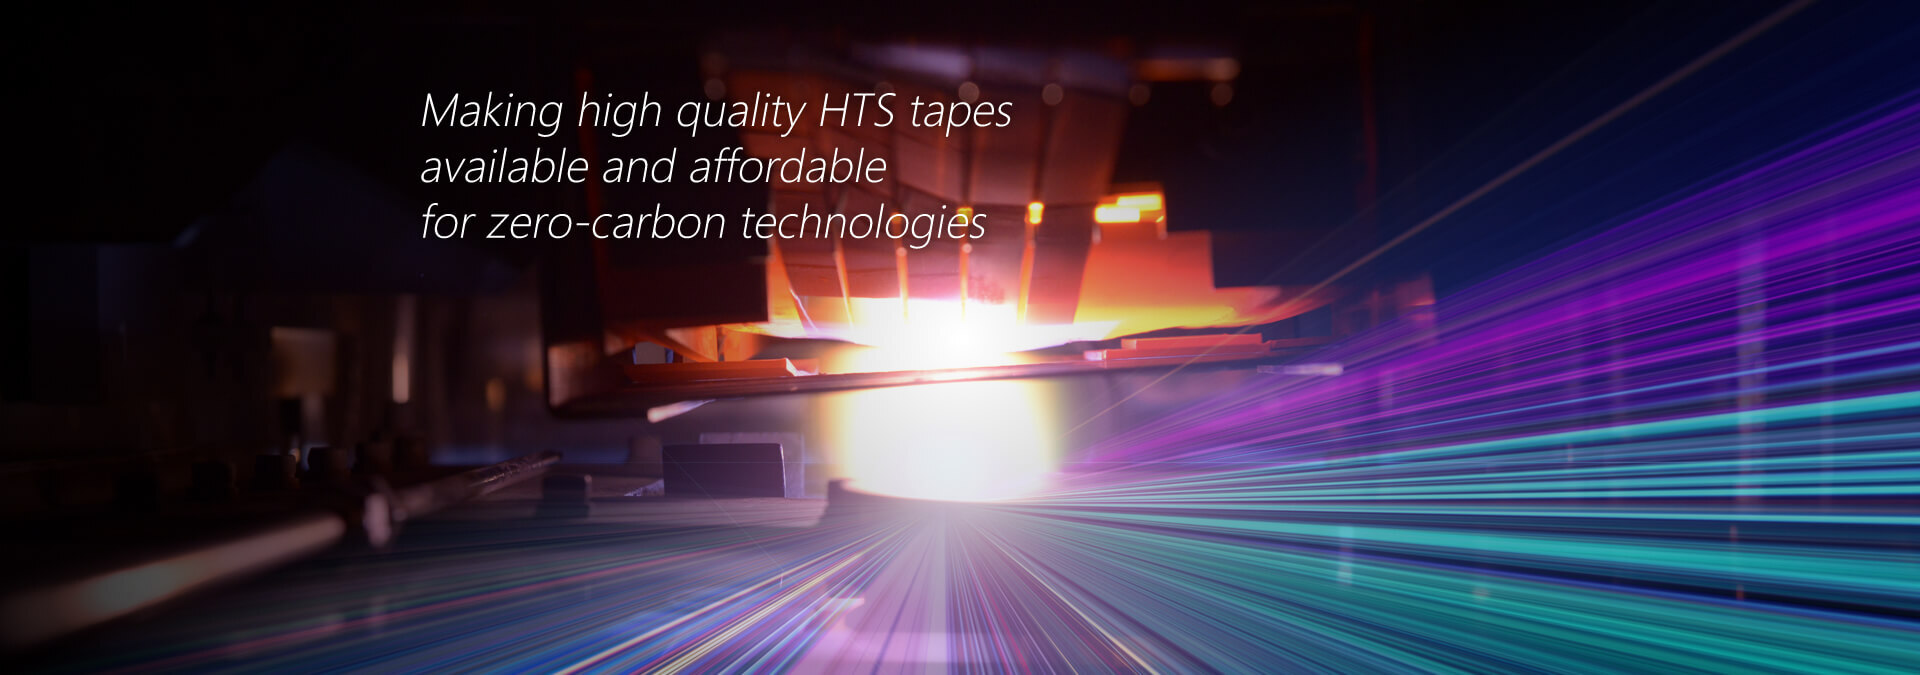 Making high quality HTS tapes available and affordable for zero-carbon technologies ゼロ・カーボン テクノロジーに向けて高品質なHTSテープを手ごろな価格で！